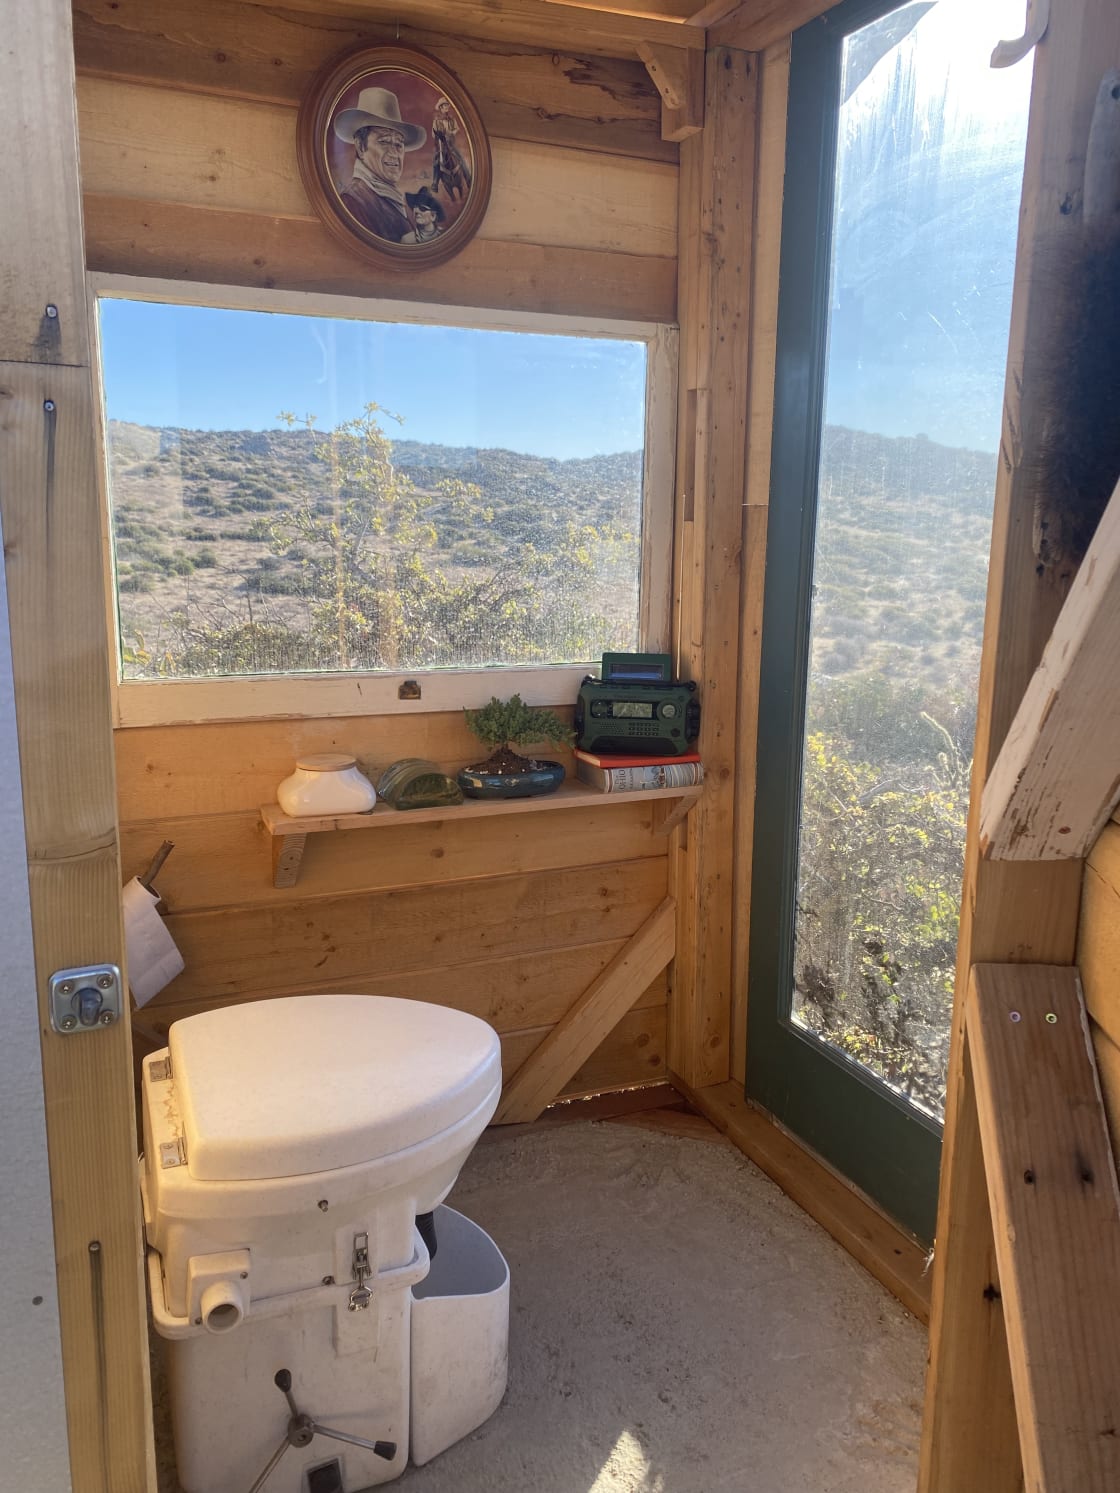 Composting outhouse with a view